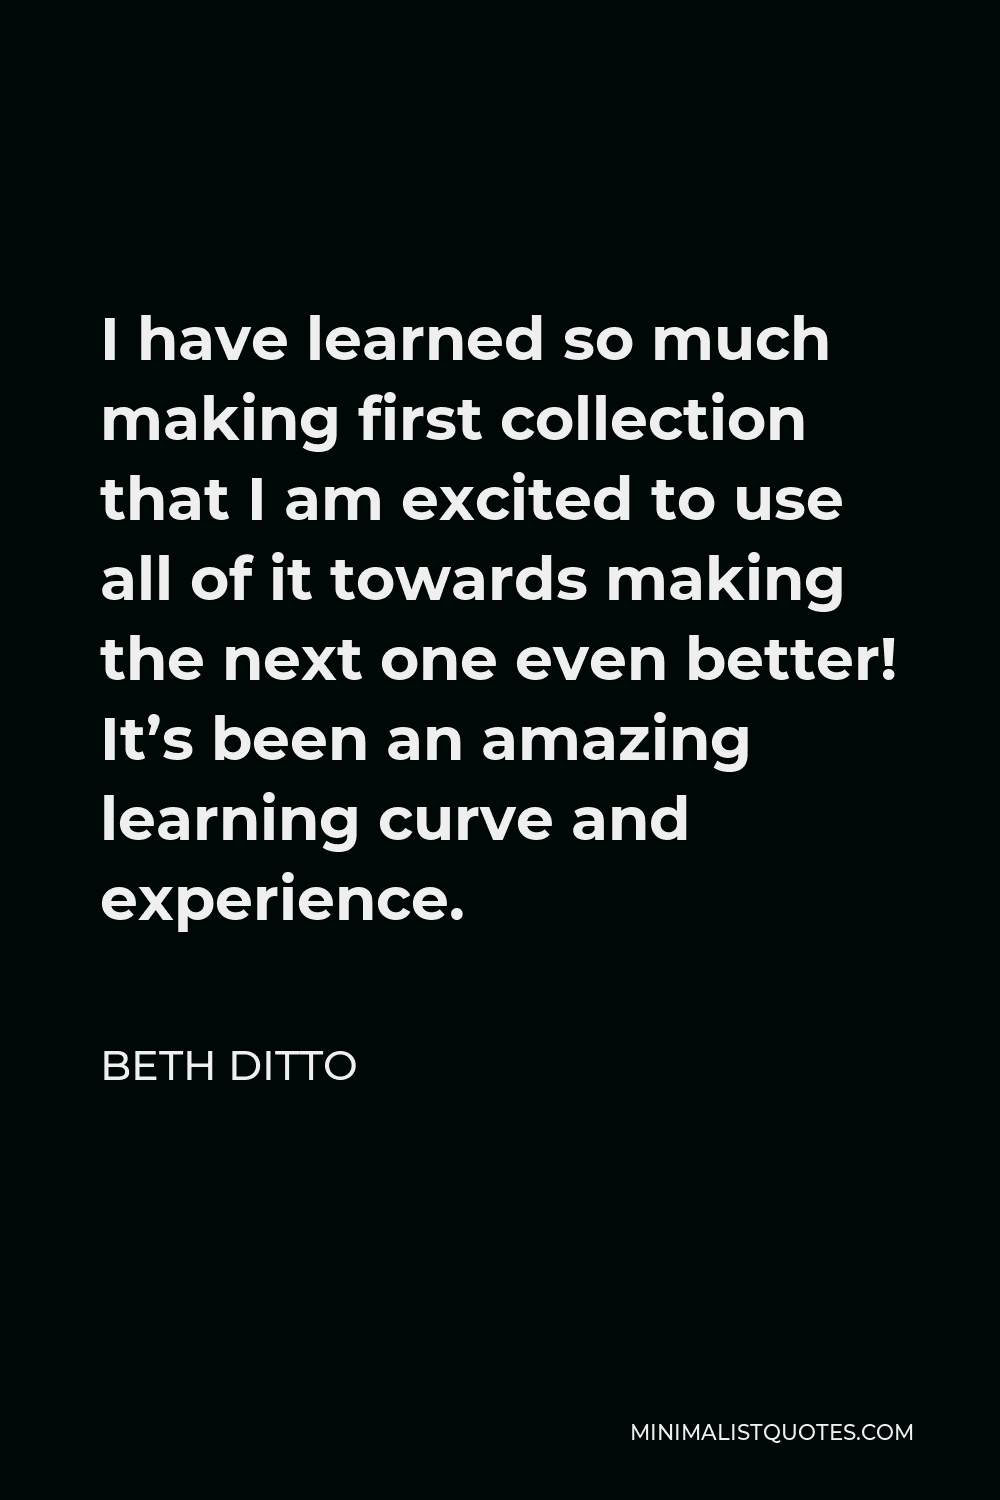 Beth Ditto Quote - I have learned so much making first collection that I am excited to use all of it towards making the next one even better! It’s been an amazing learning curve and experience.